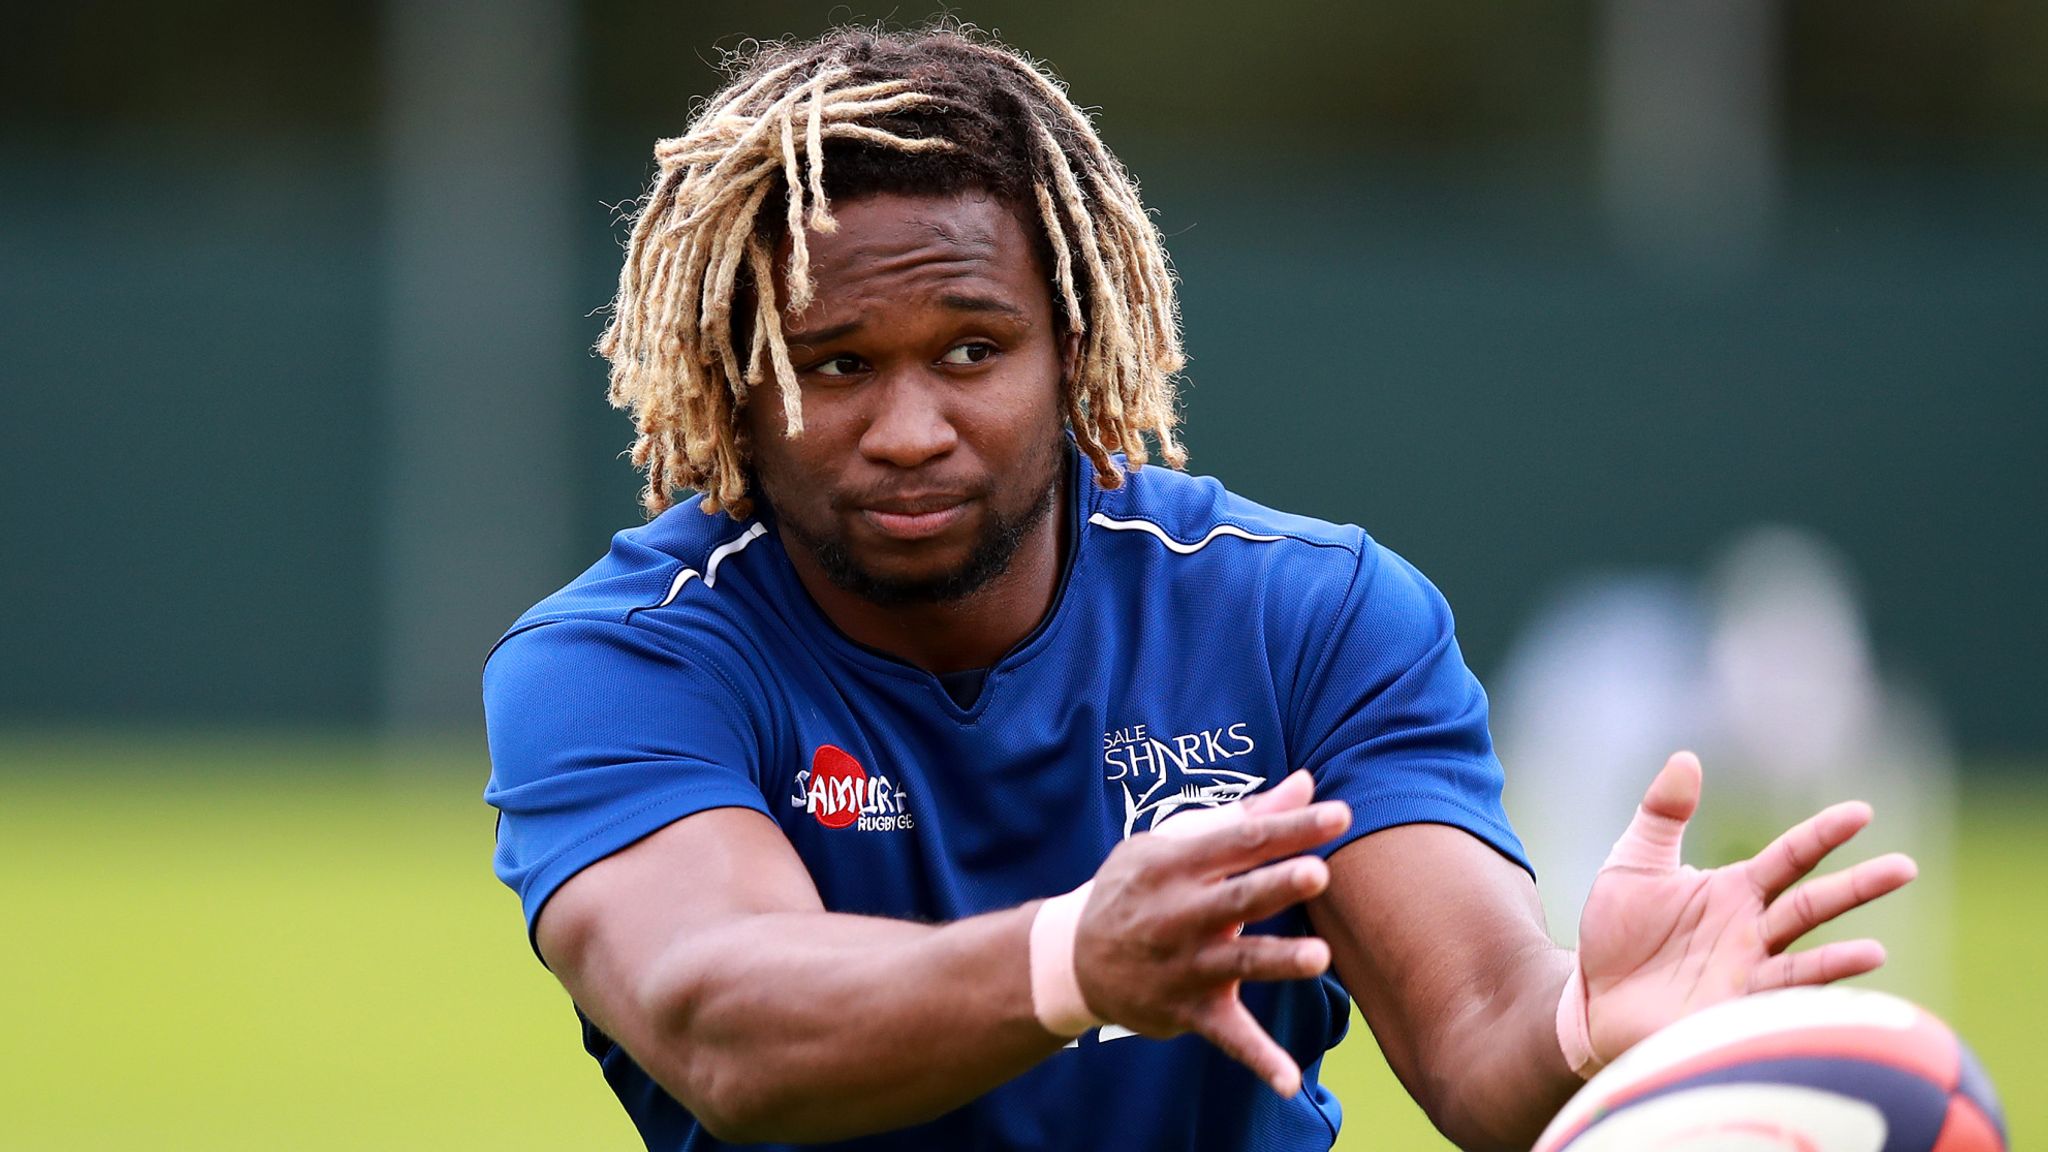 Marland Yarde Sale Sharks winger speaks out on racism, George Floyd and Black Lives Matter Rugby Union News Sky Sports